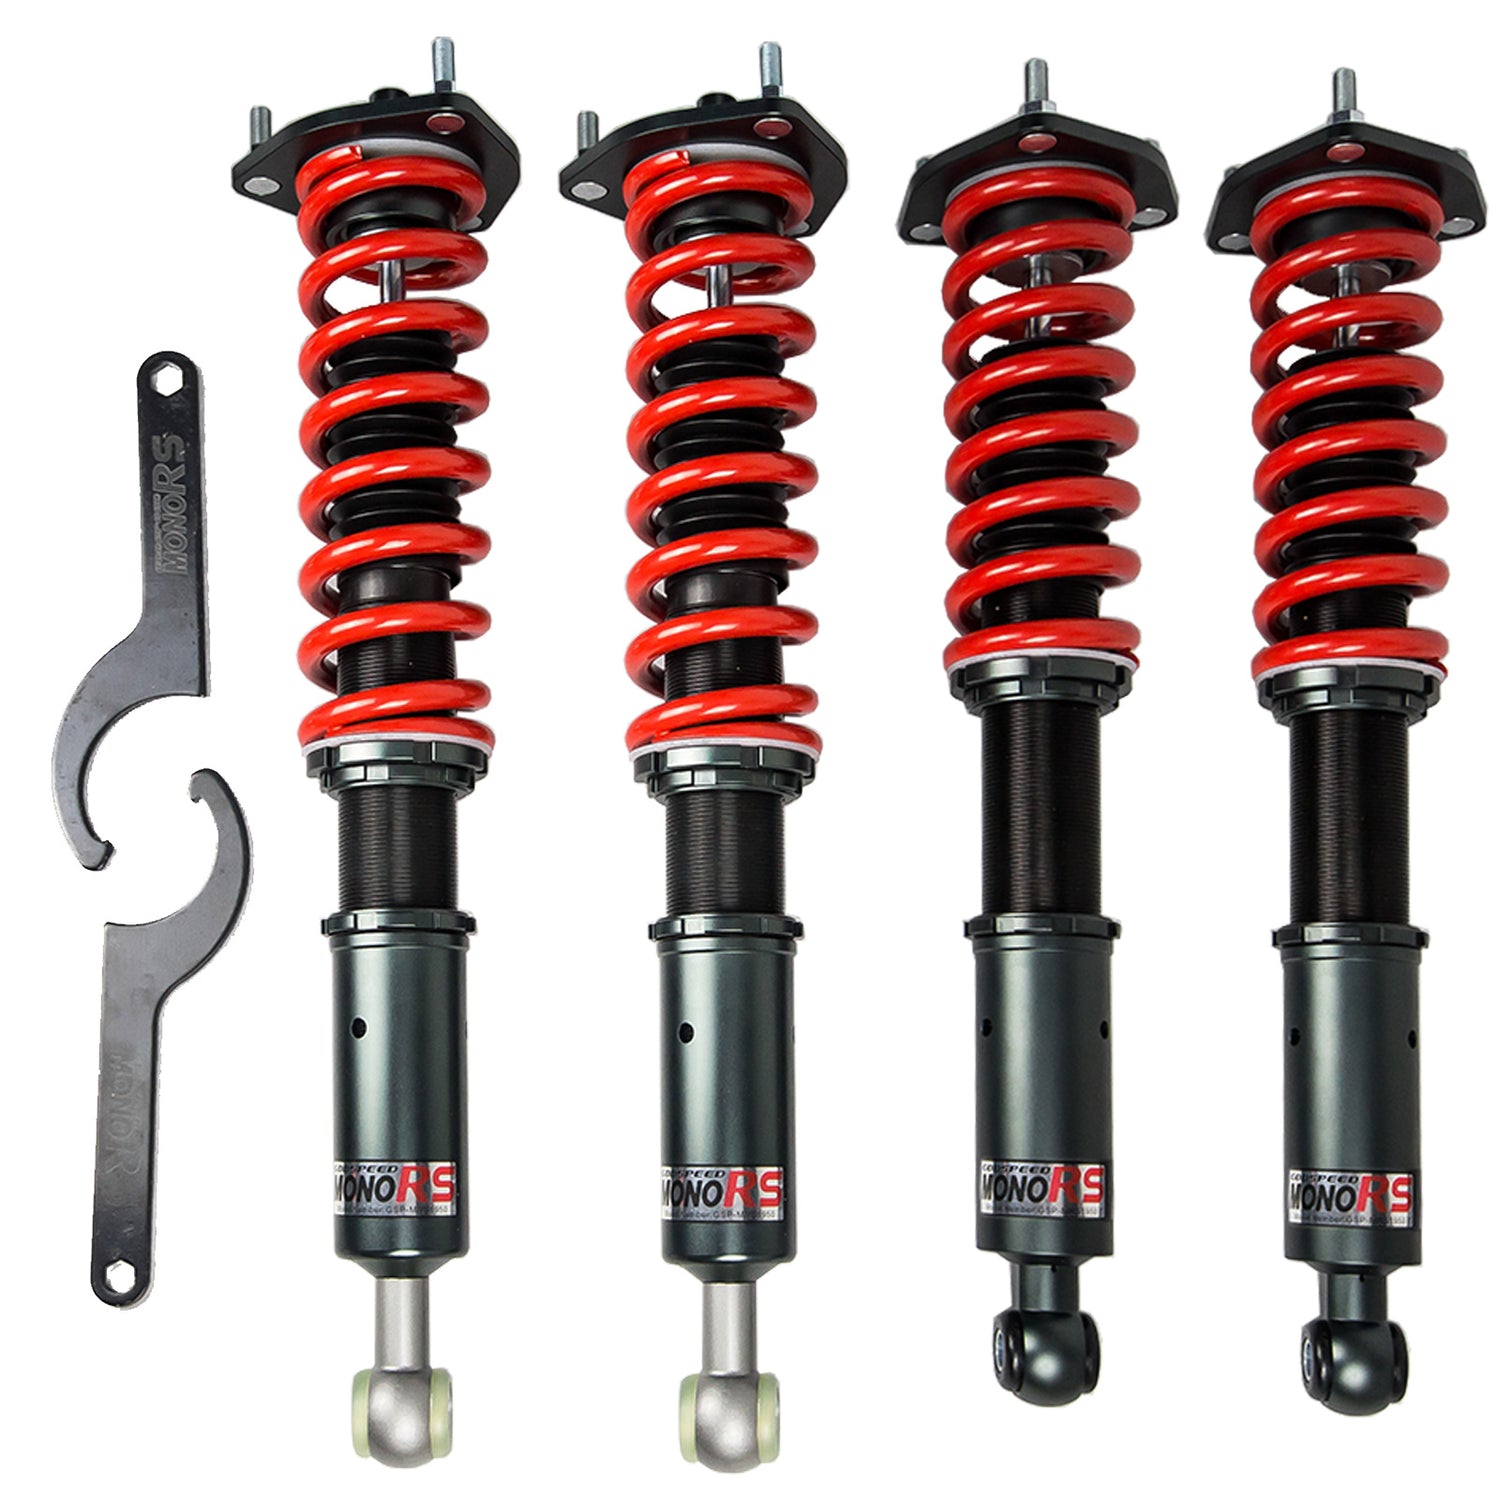 Godspeed MRS1950 MonoRS Coilover Lowering Kit, 32 Damping Adjustment, Ride Height Adjustable